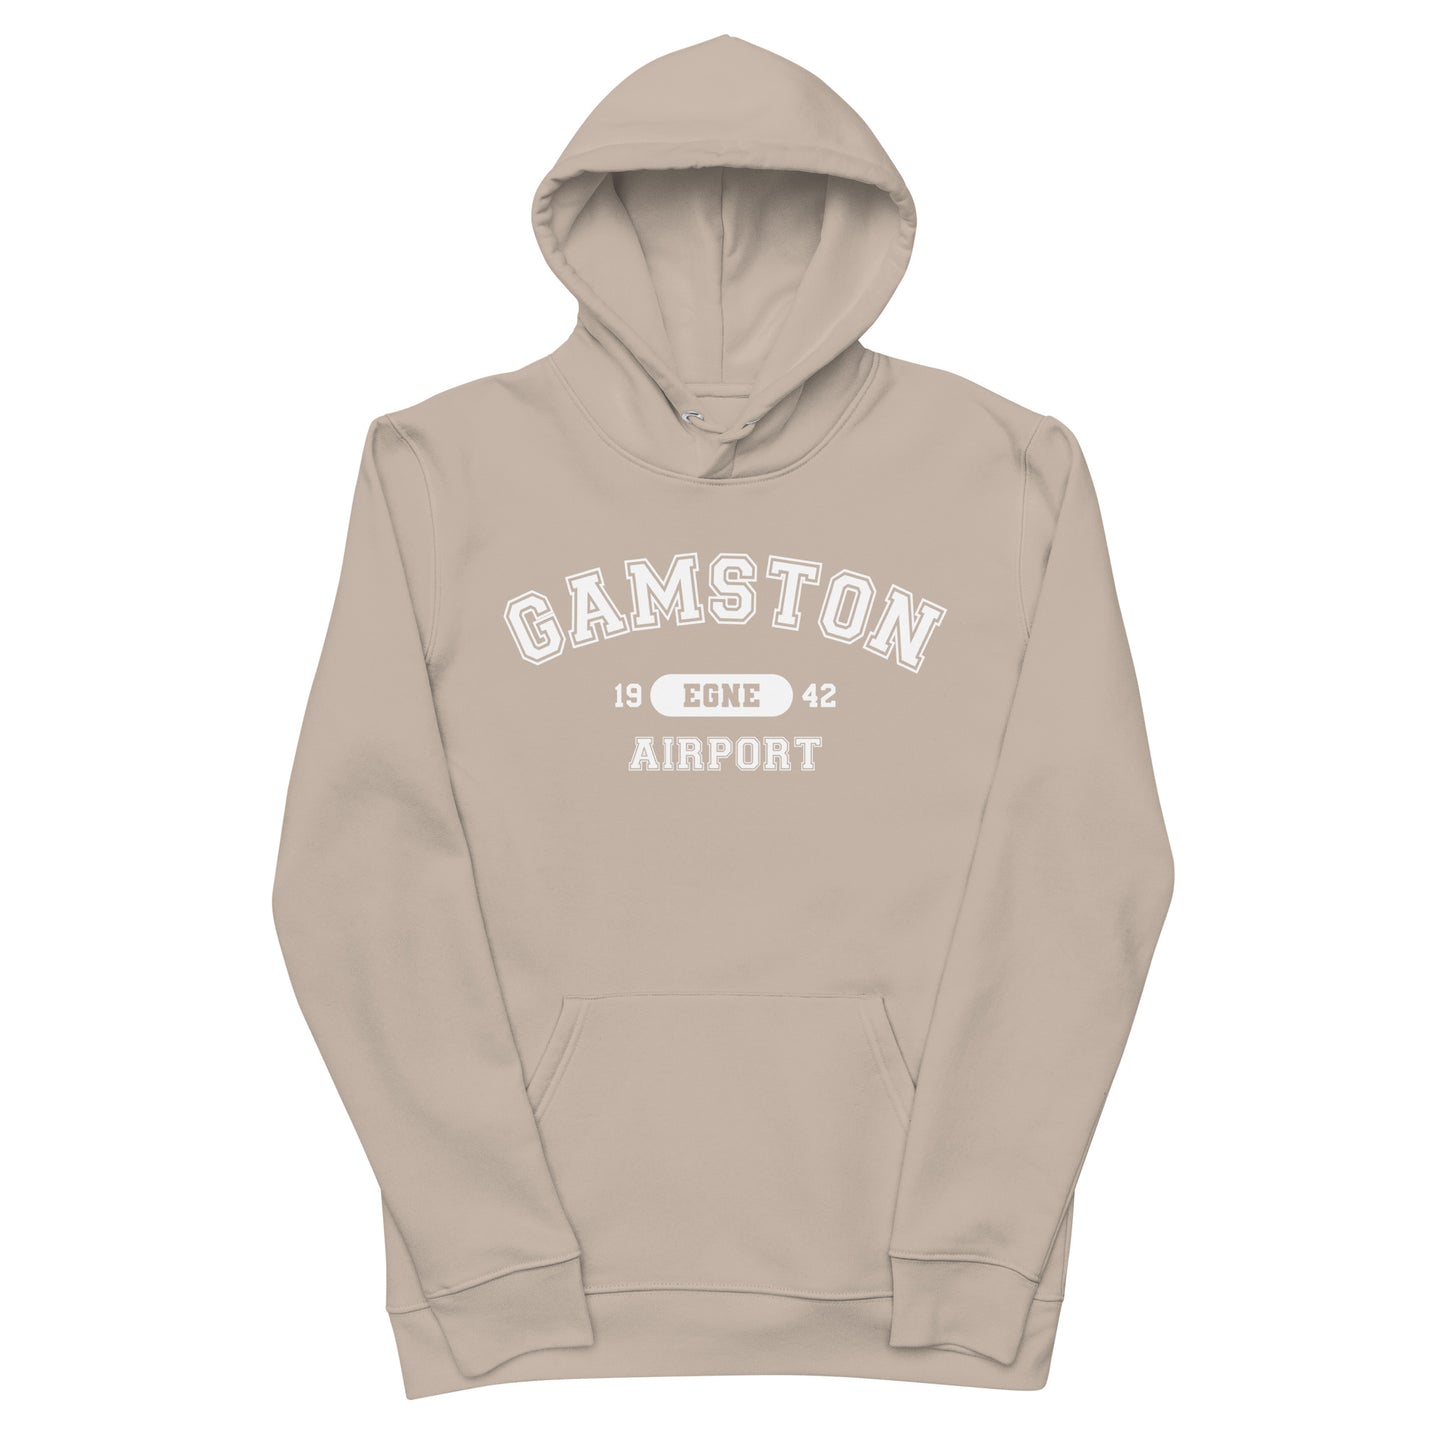 Gamston Airport with ICAO code in collegiate style. Unisex essential eco hoodie.